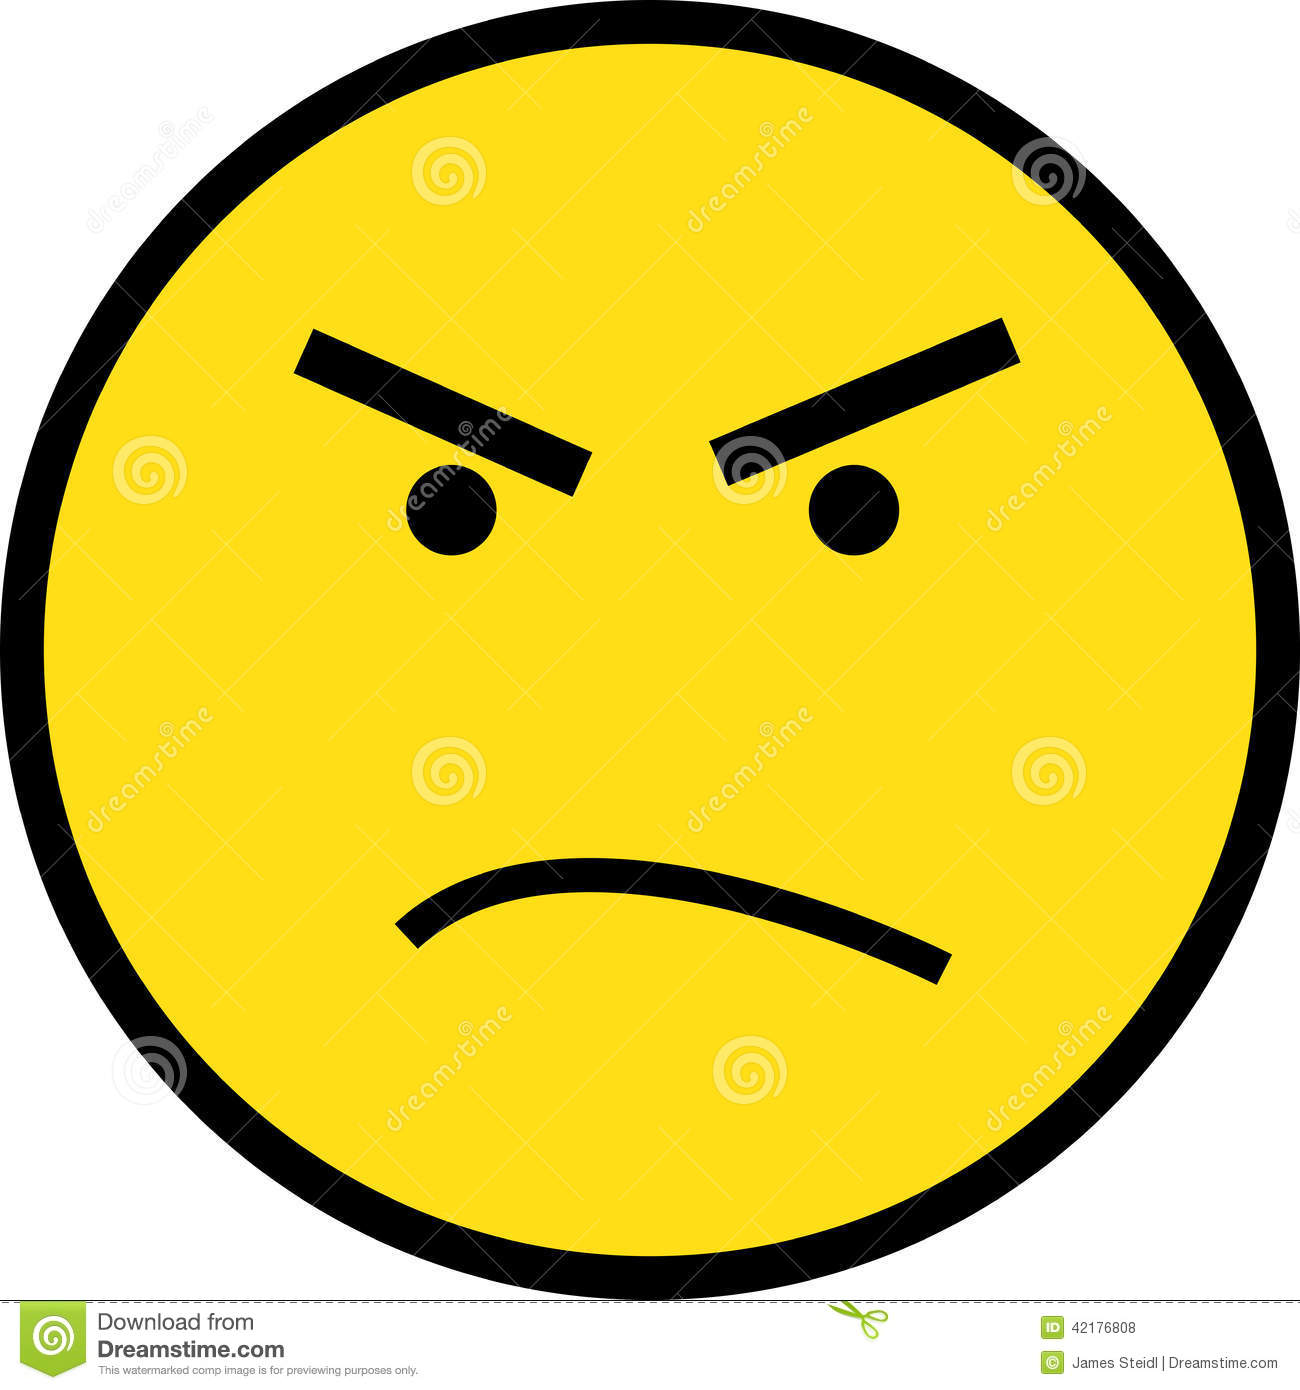 Yellow Angry Face Stock Vector   Image  42176808